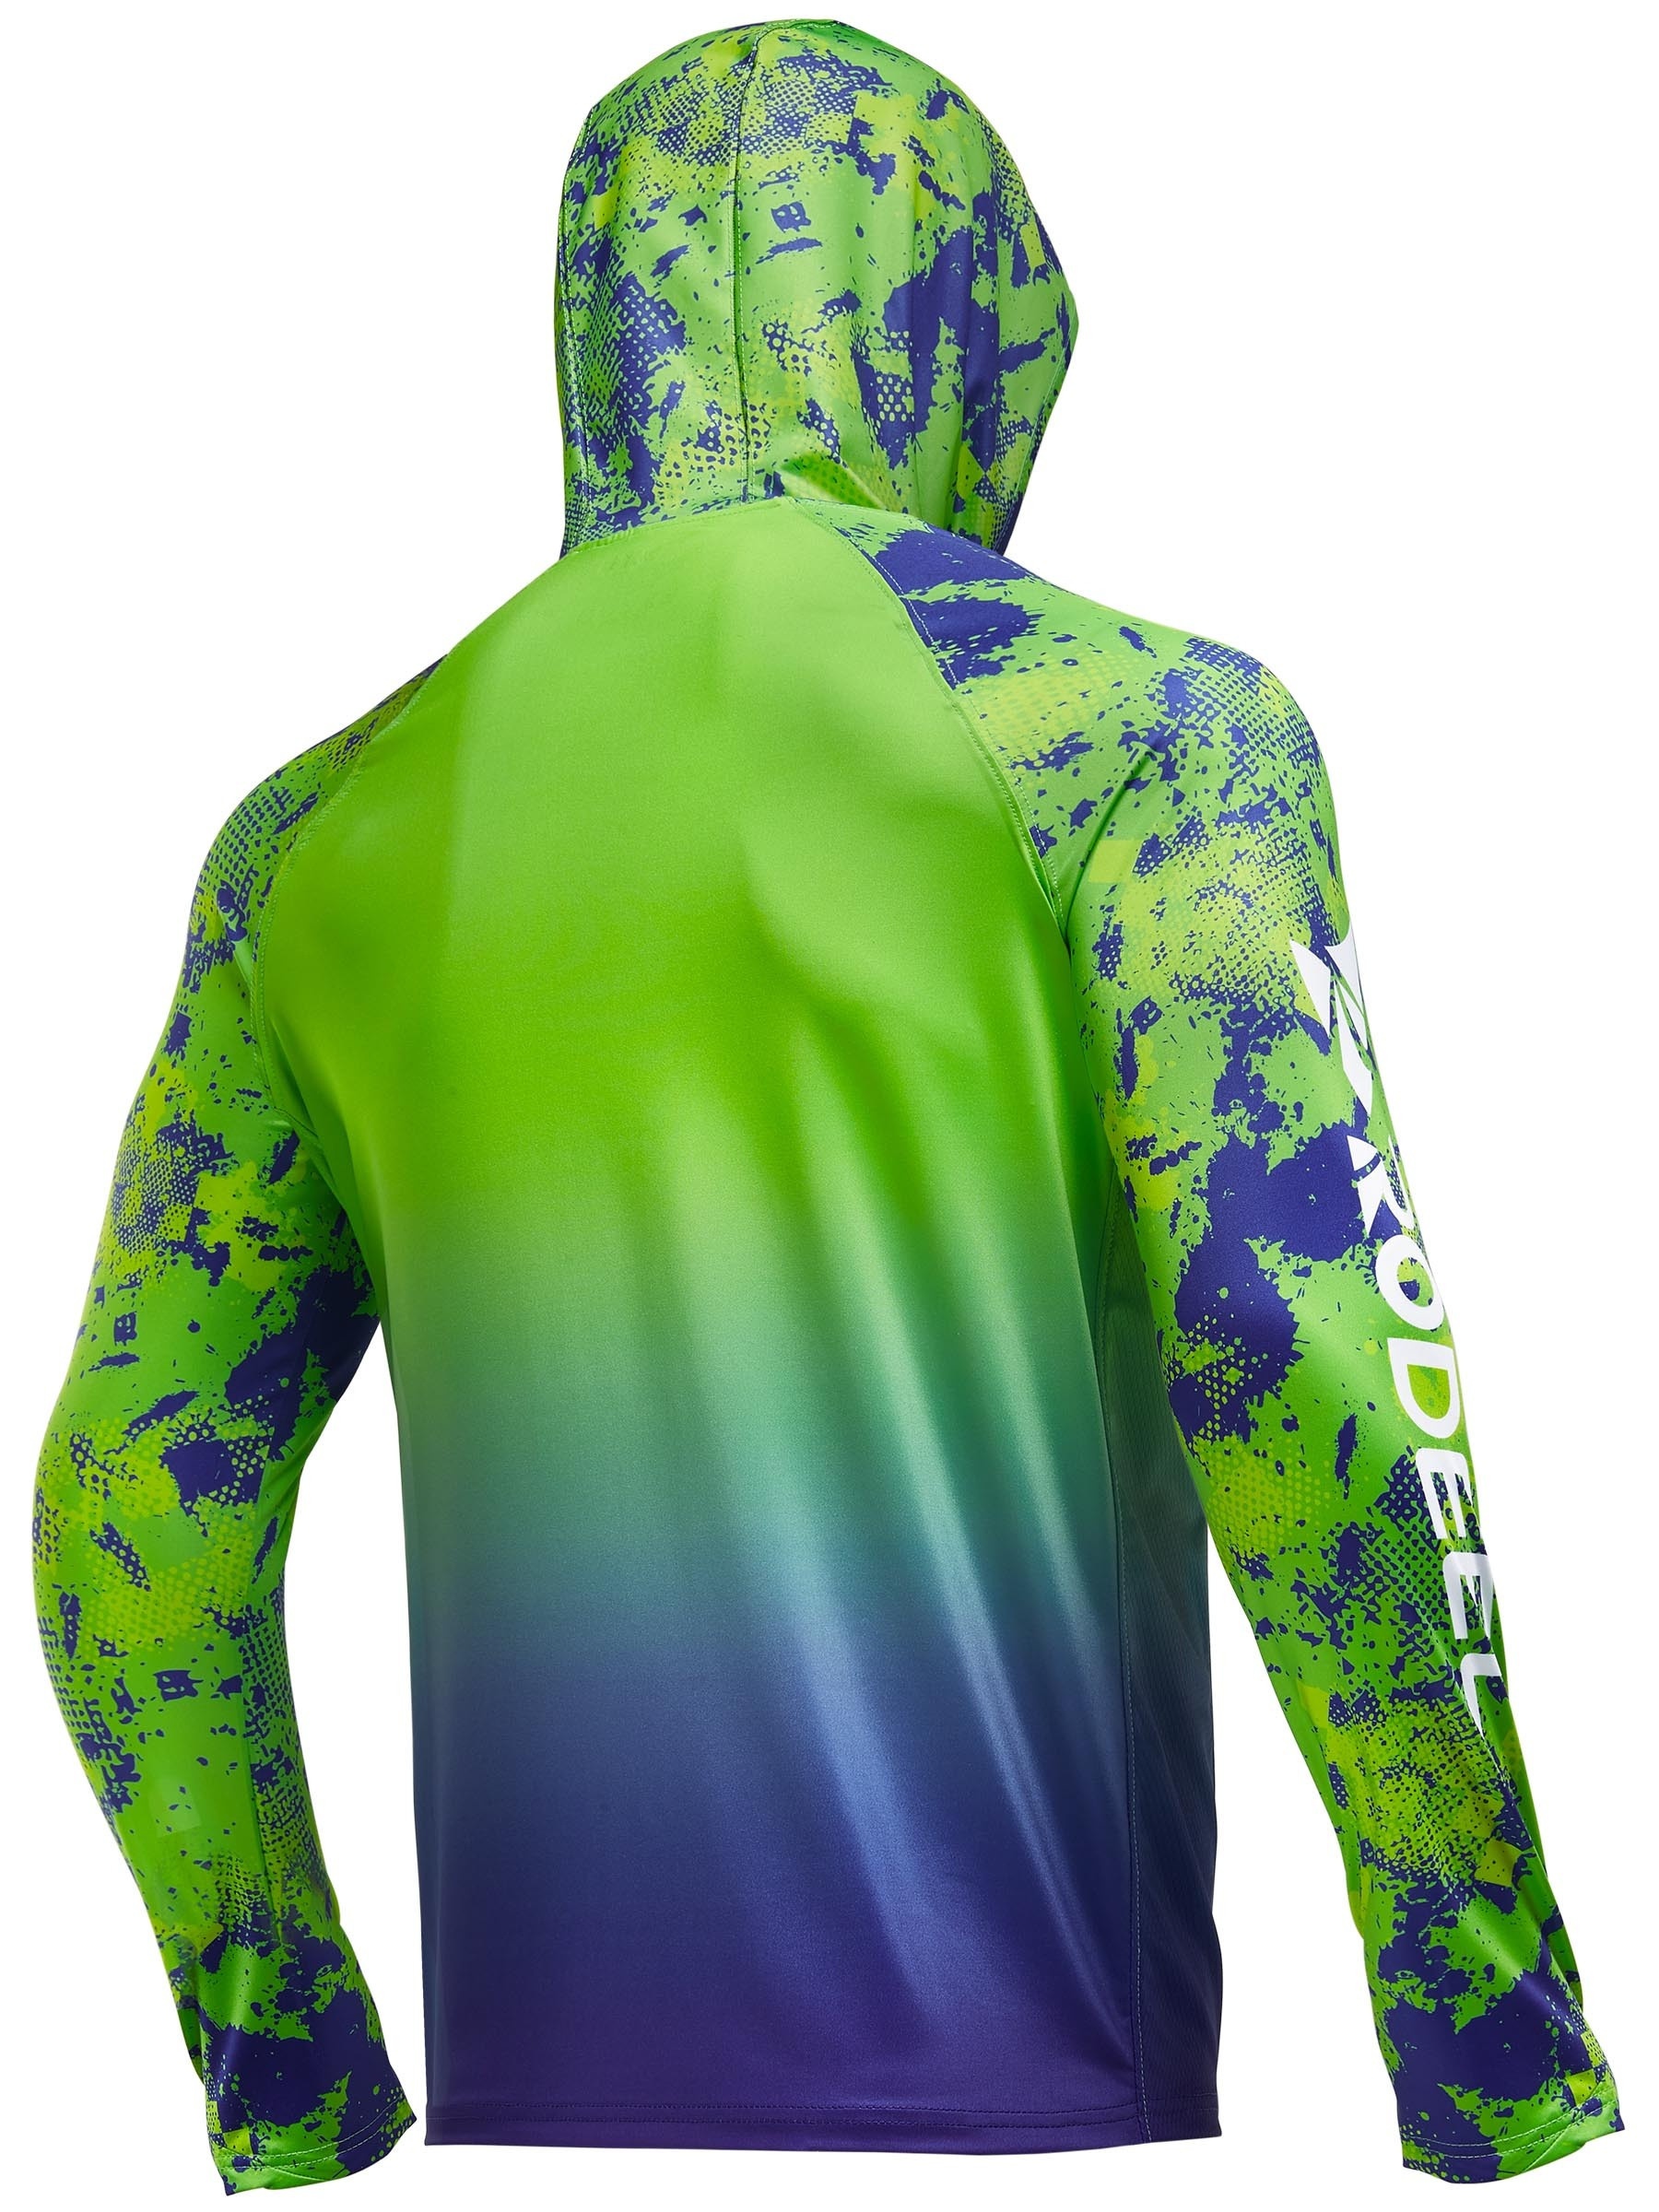 KOOFIN GEAR Performance Fishing Hoodie with Face Mask Hooded